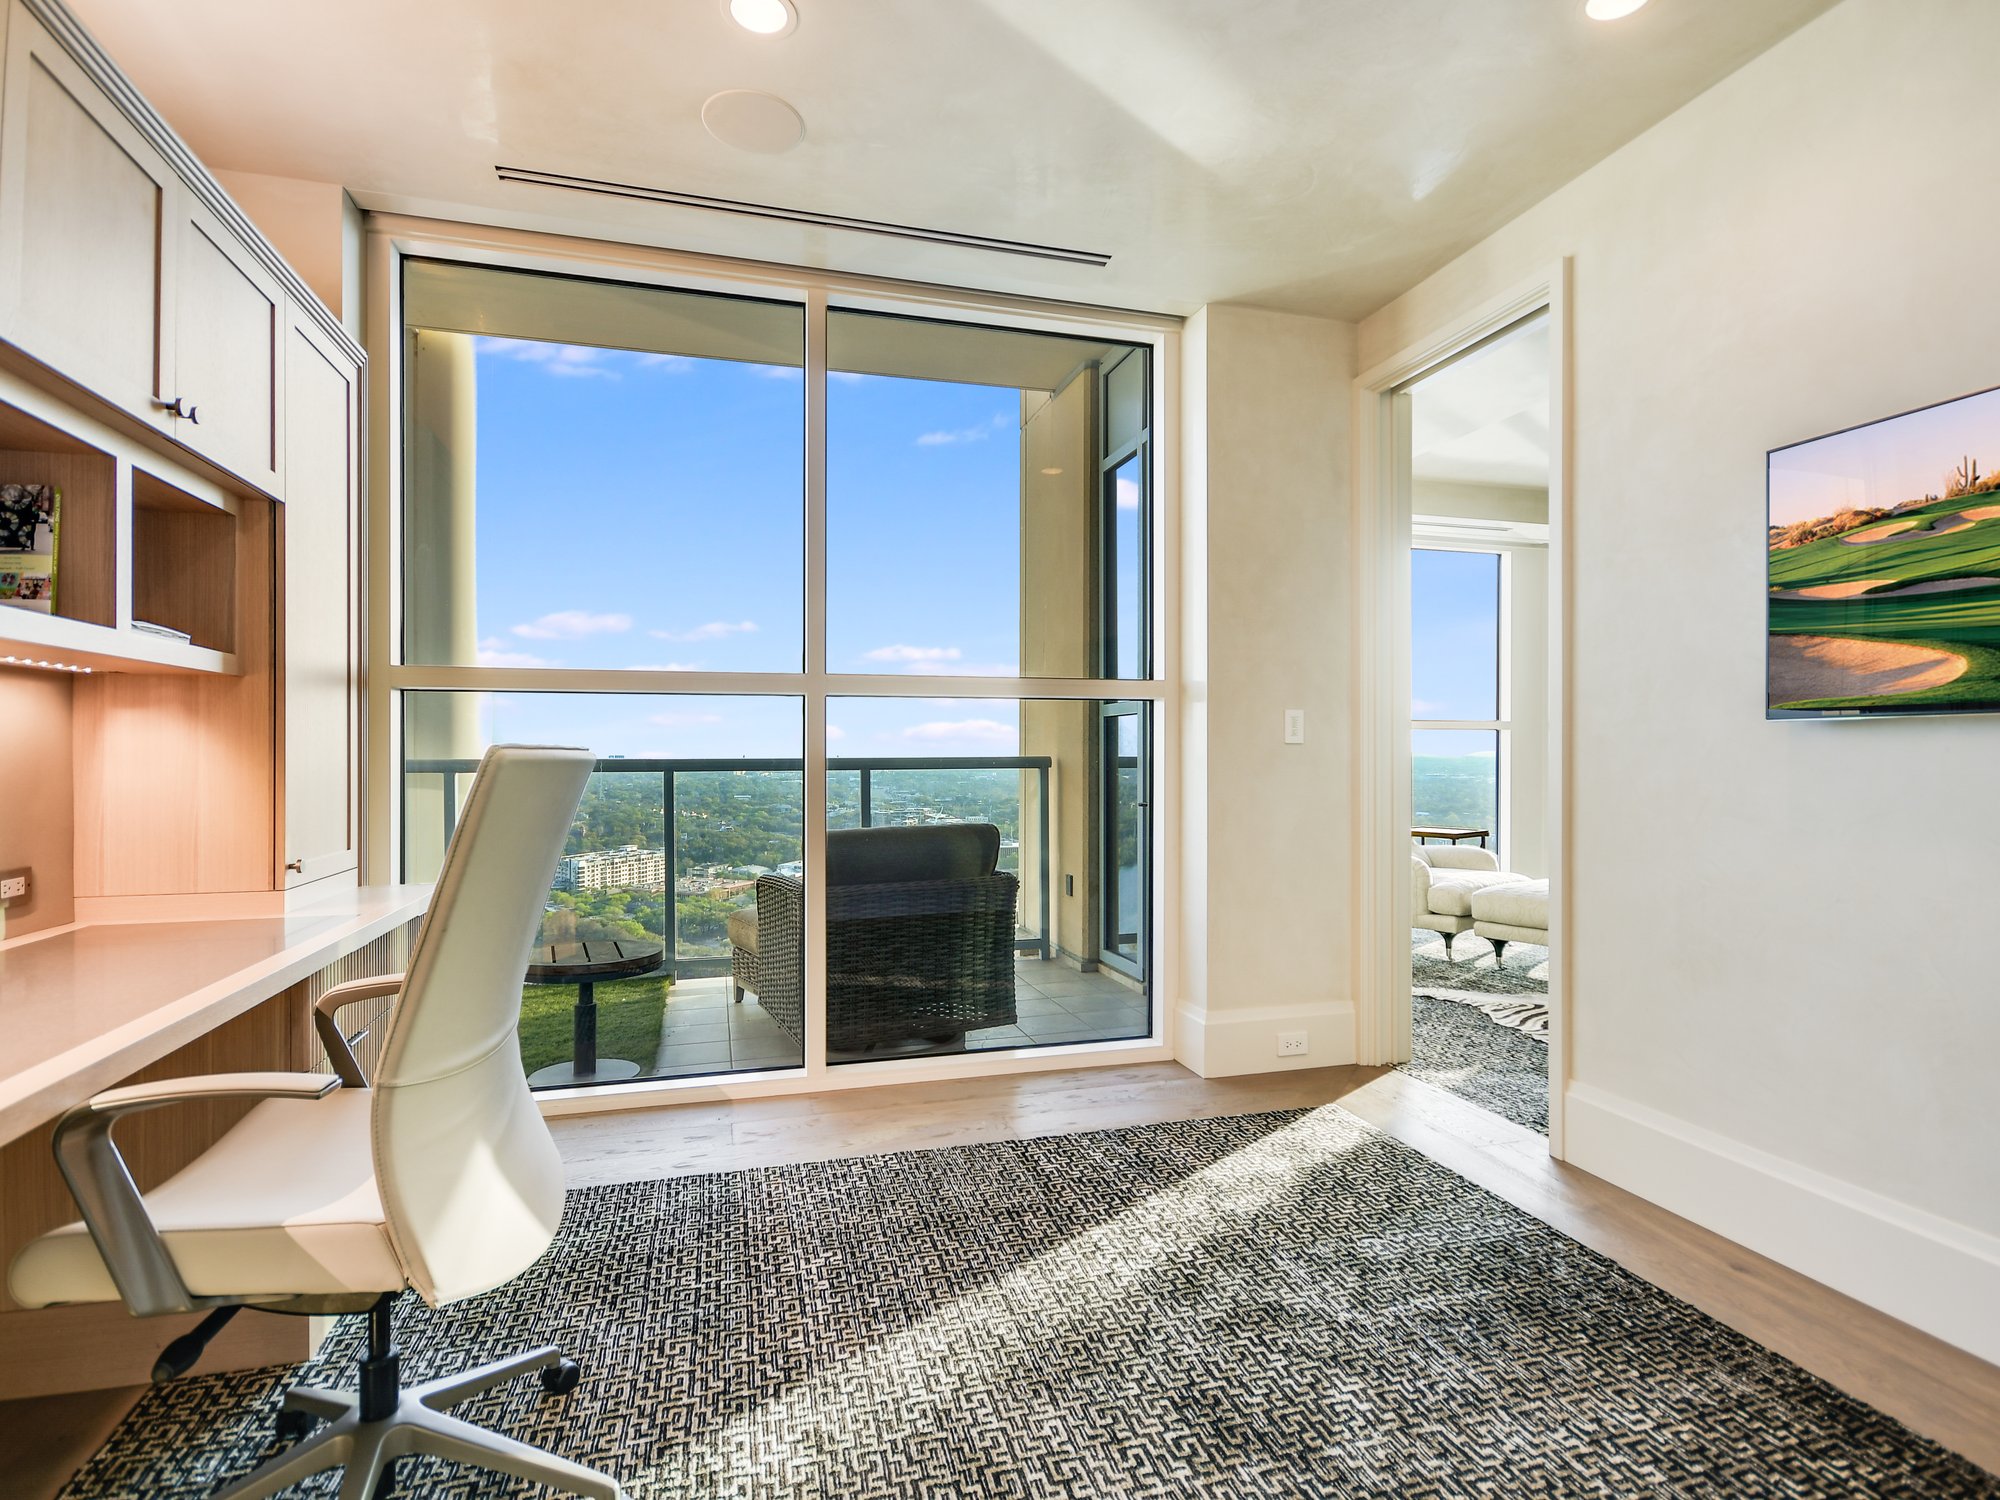 The Four Seasons, 30th Floor Penthouse in Austin, TX, United States for sale (10893313)